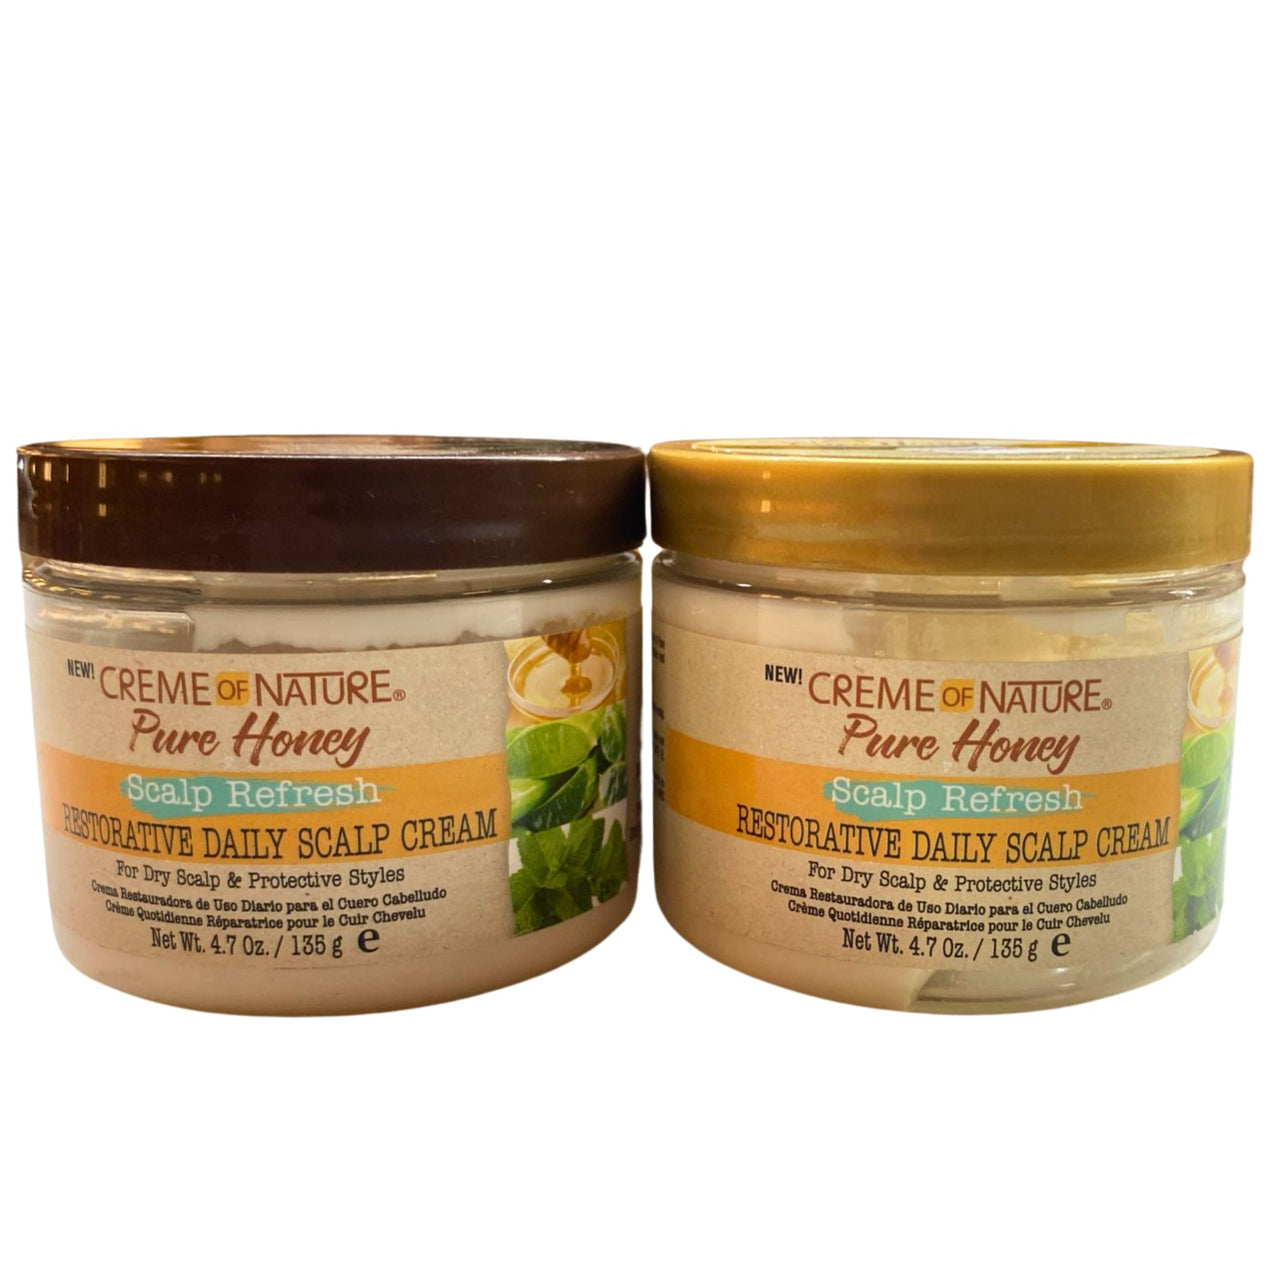 Creme Of Nature Pure Honey Scalp Refresh Restorative Daily Scalp Cream For Dry Scalp & Protective Styles